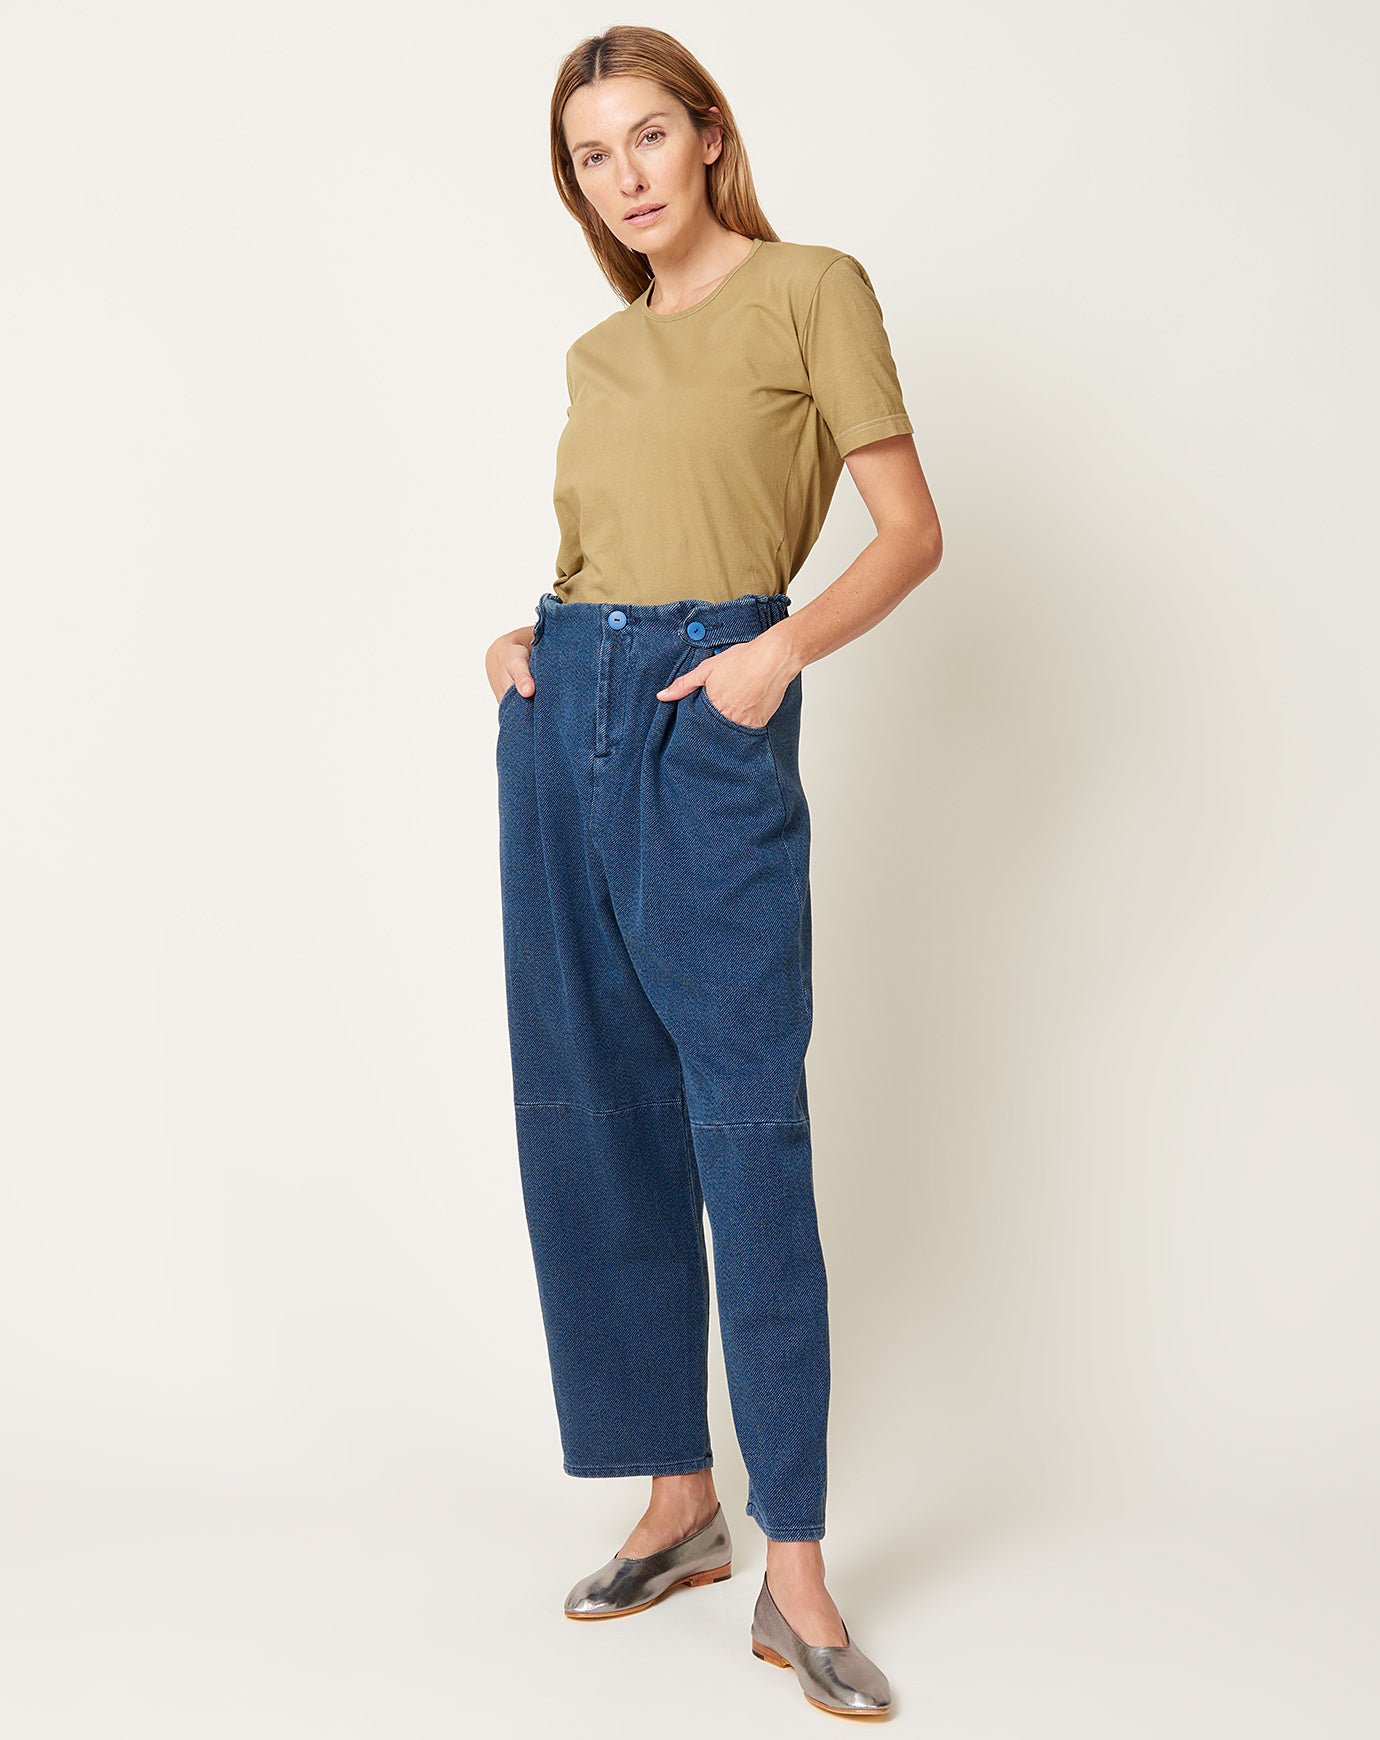 Anntian One Pleat Pant in Garment Washed Indigo